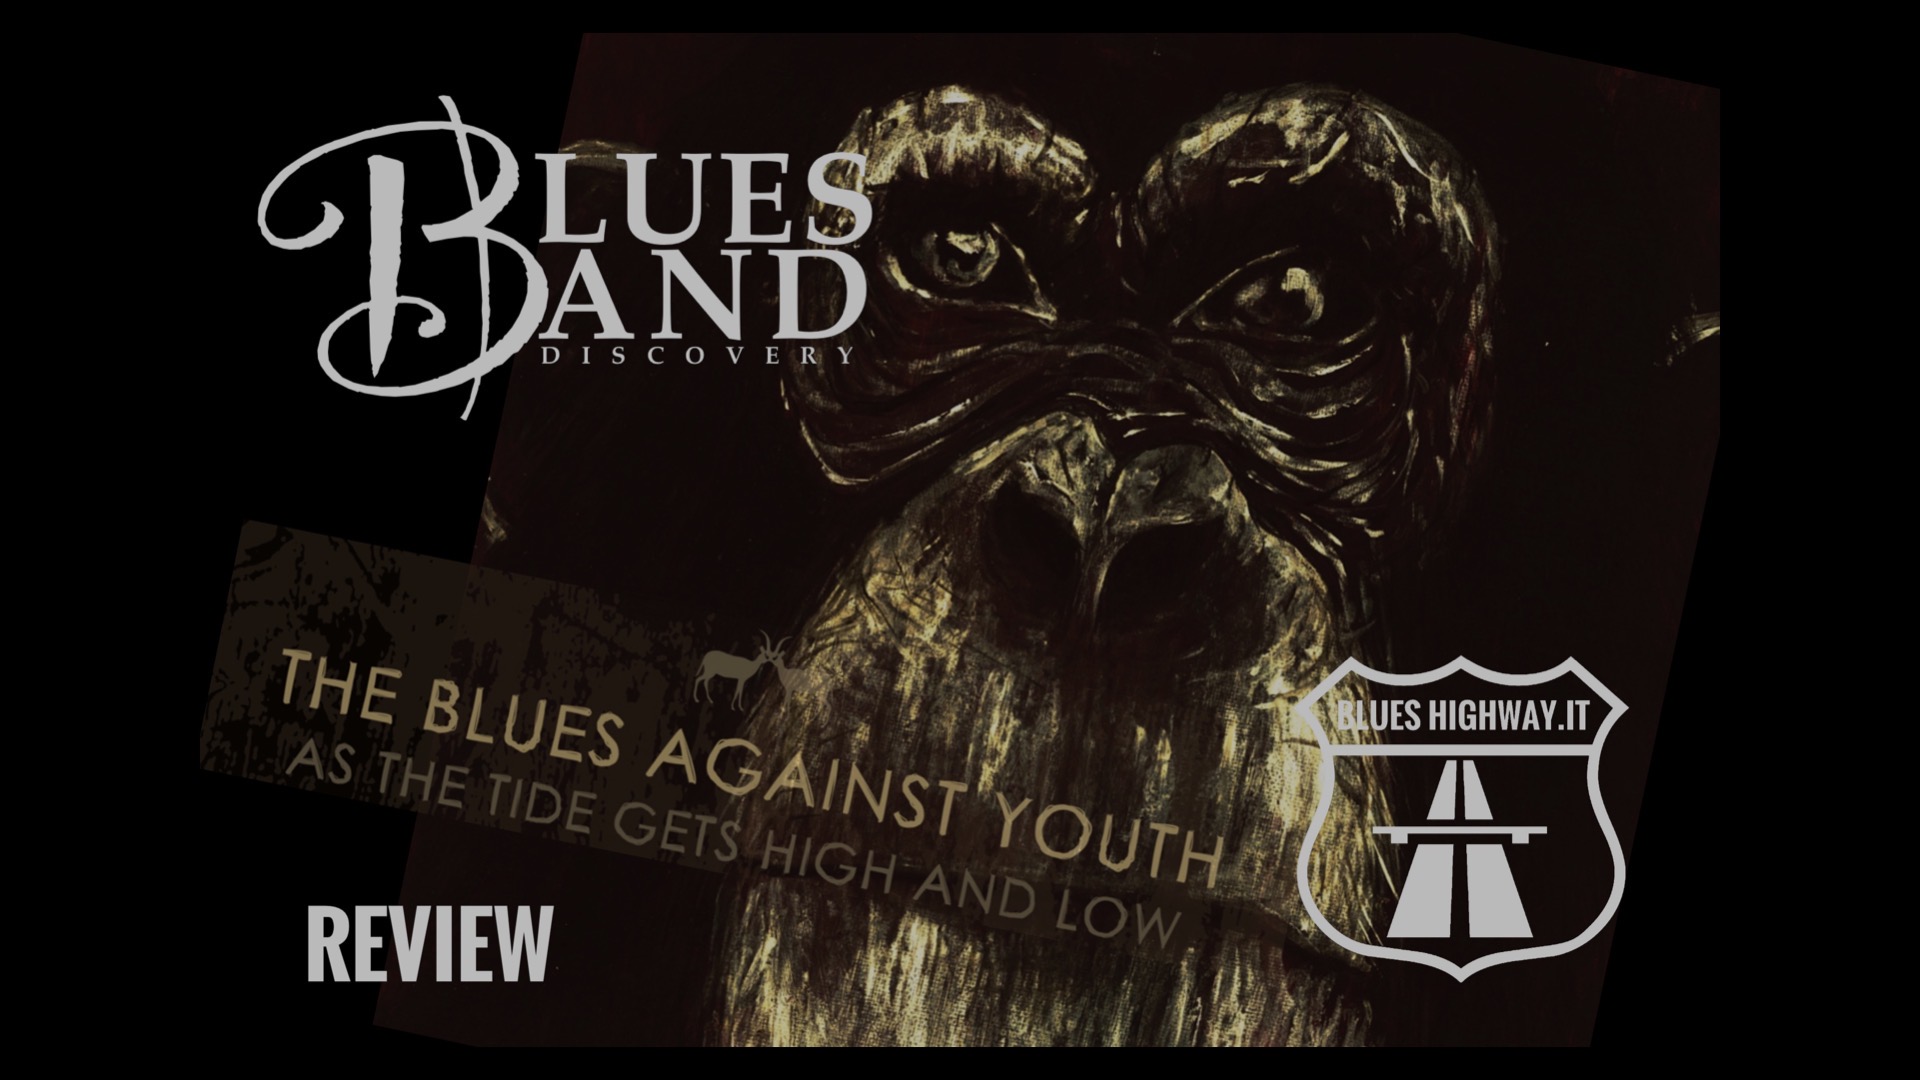 AS THE TIDE GETS HIGH AND LOW - THE BLUES AGAINST YOUTH